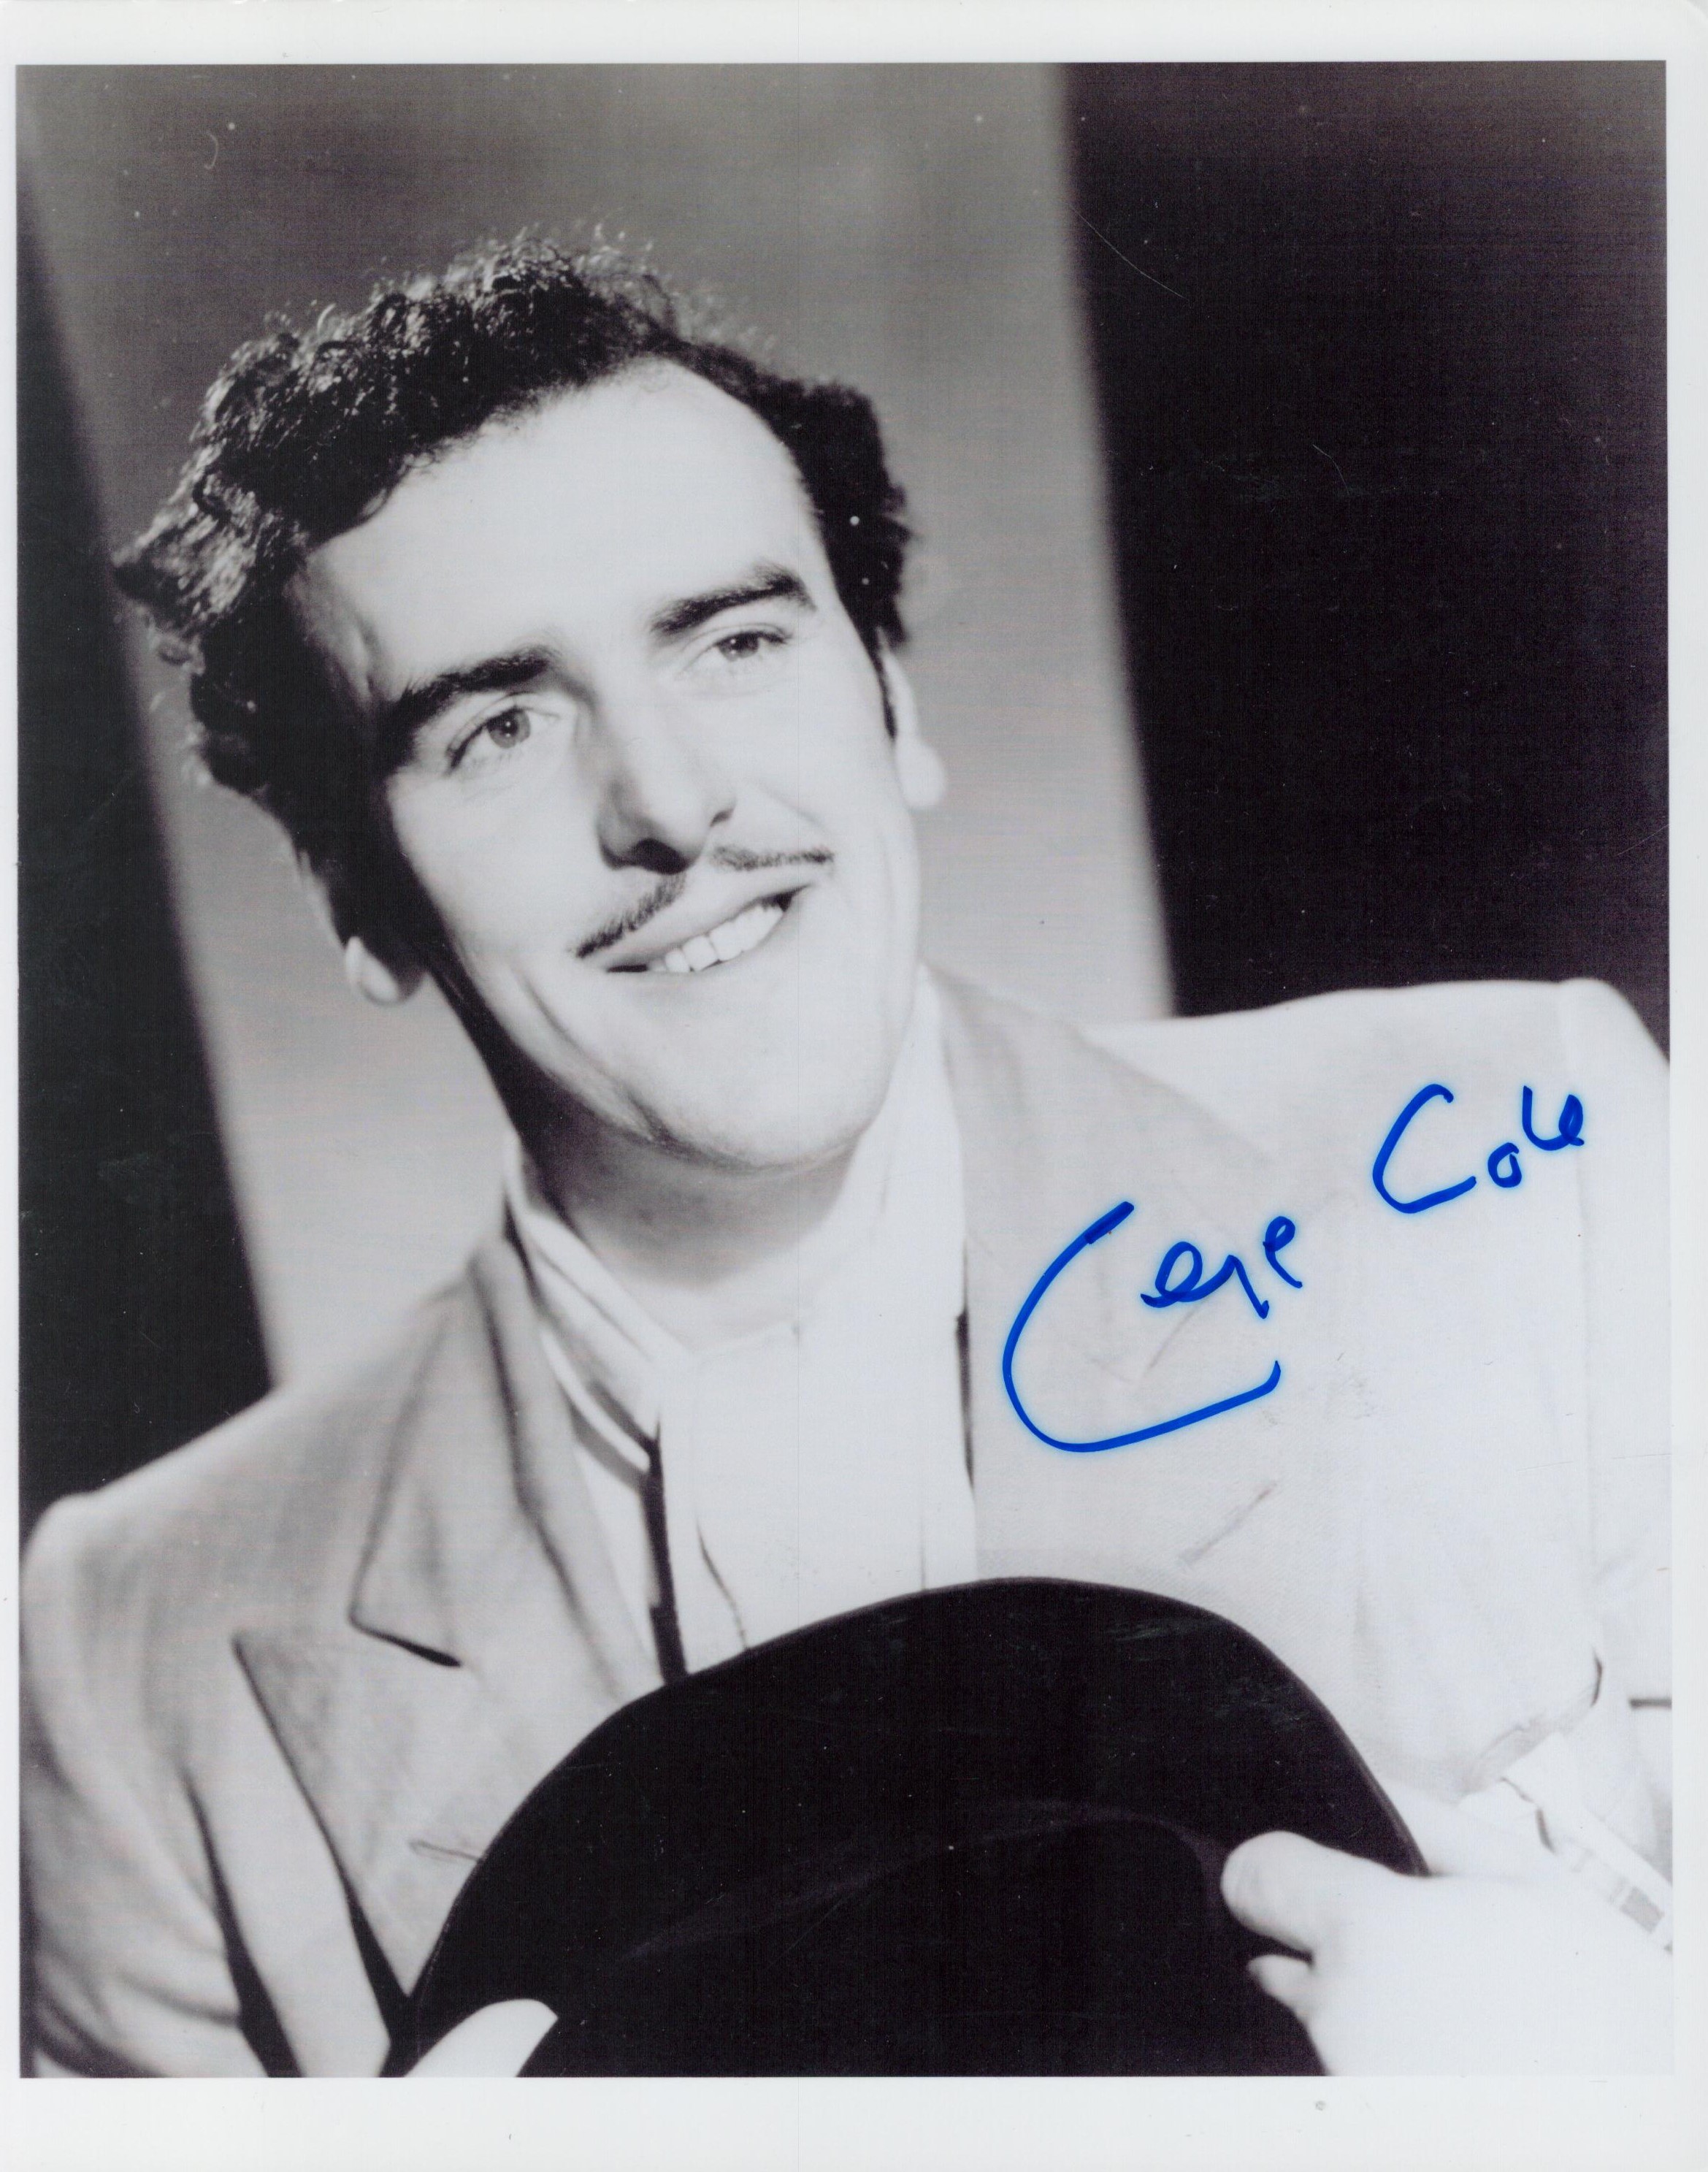 George Cole signed 10x8 inch black and white vintage photo. Good condition. All autographs are